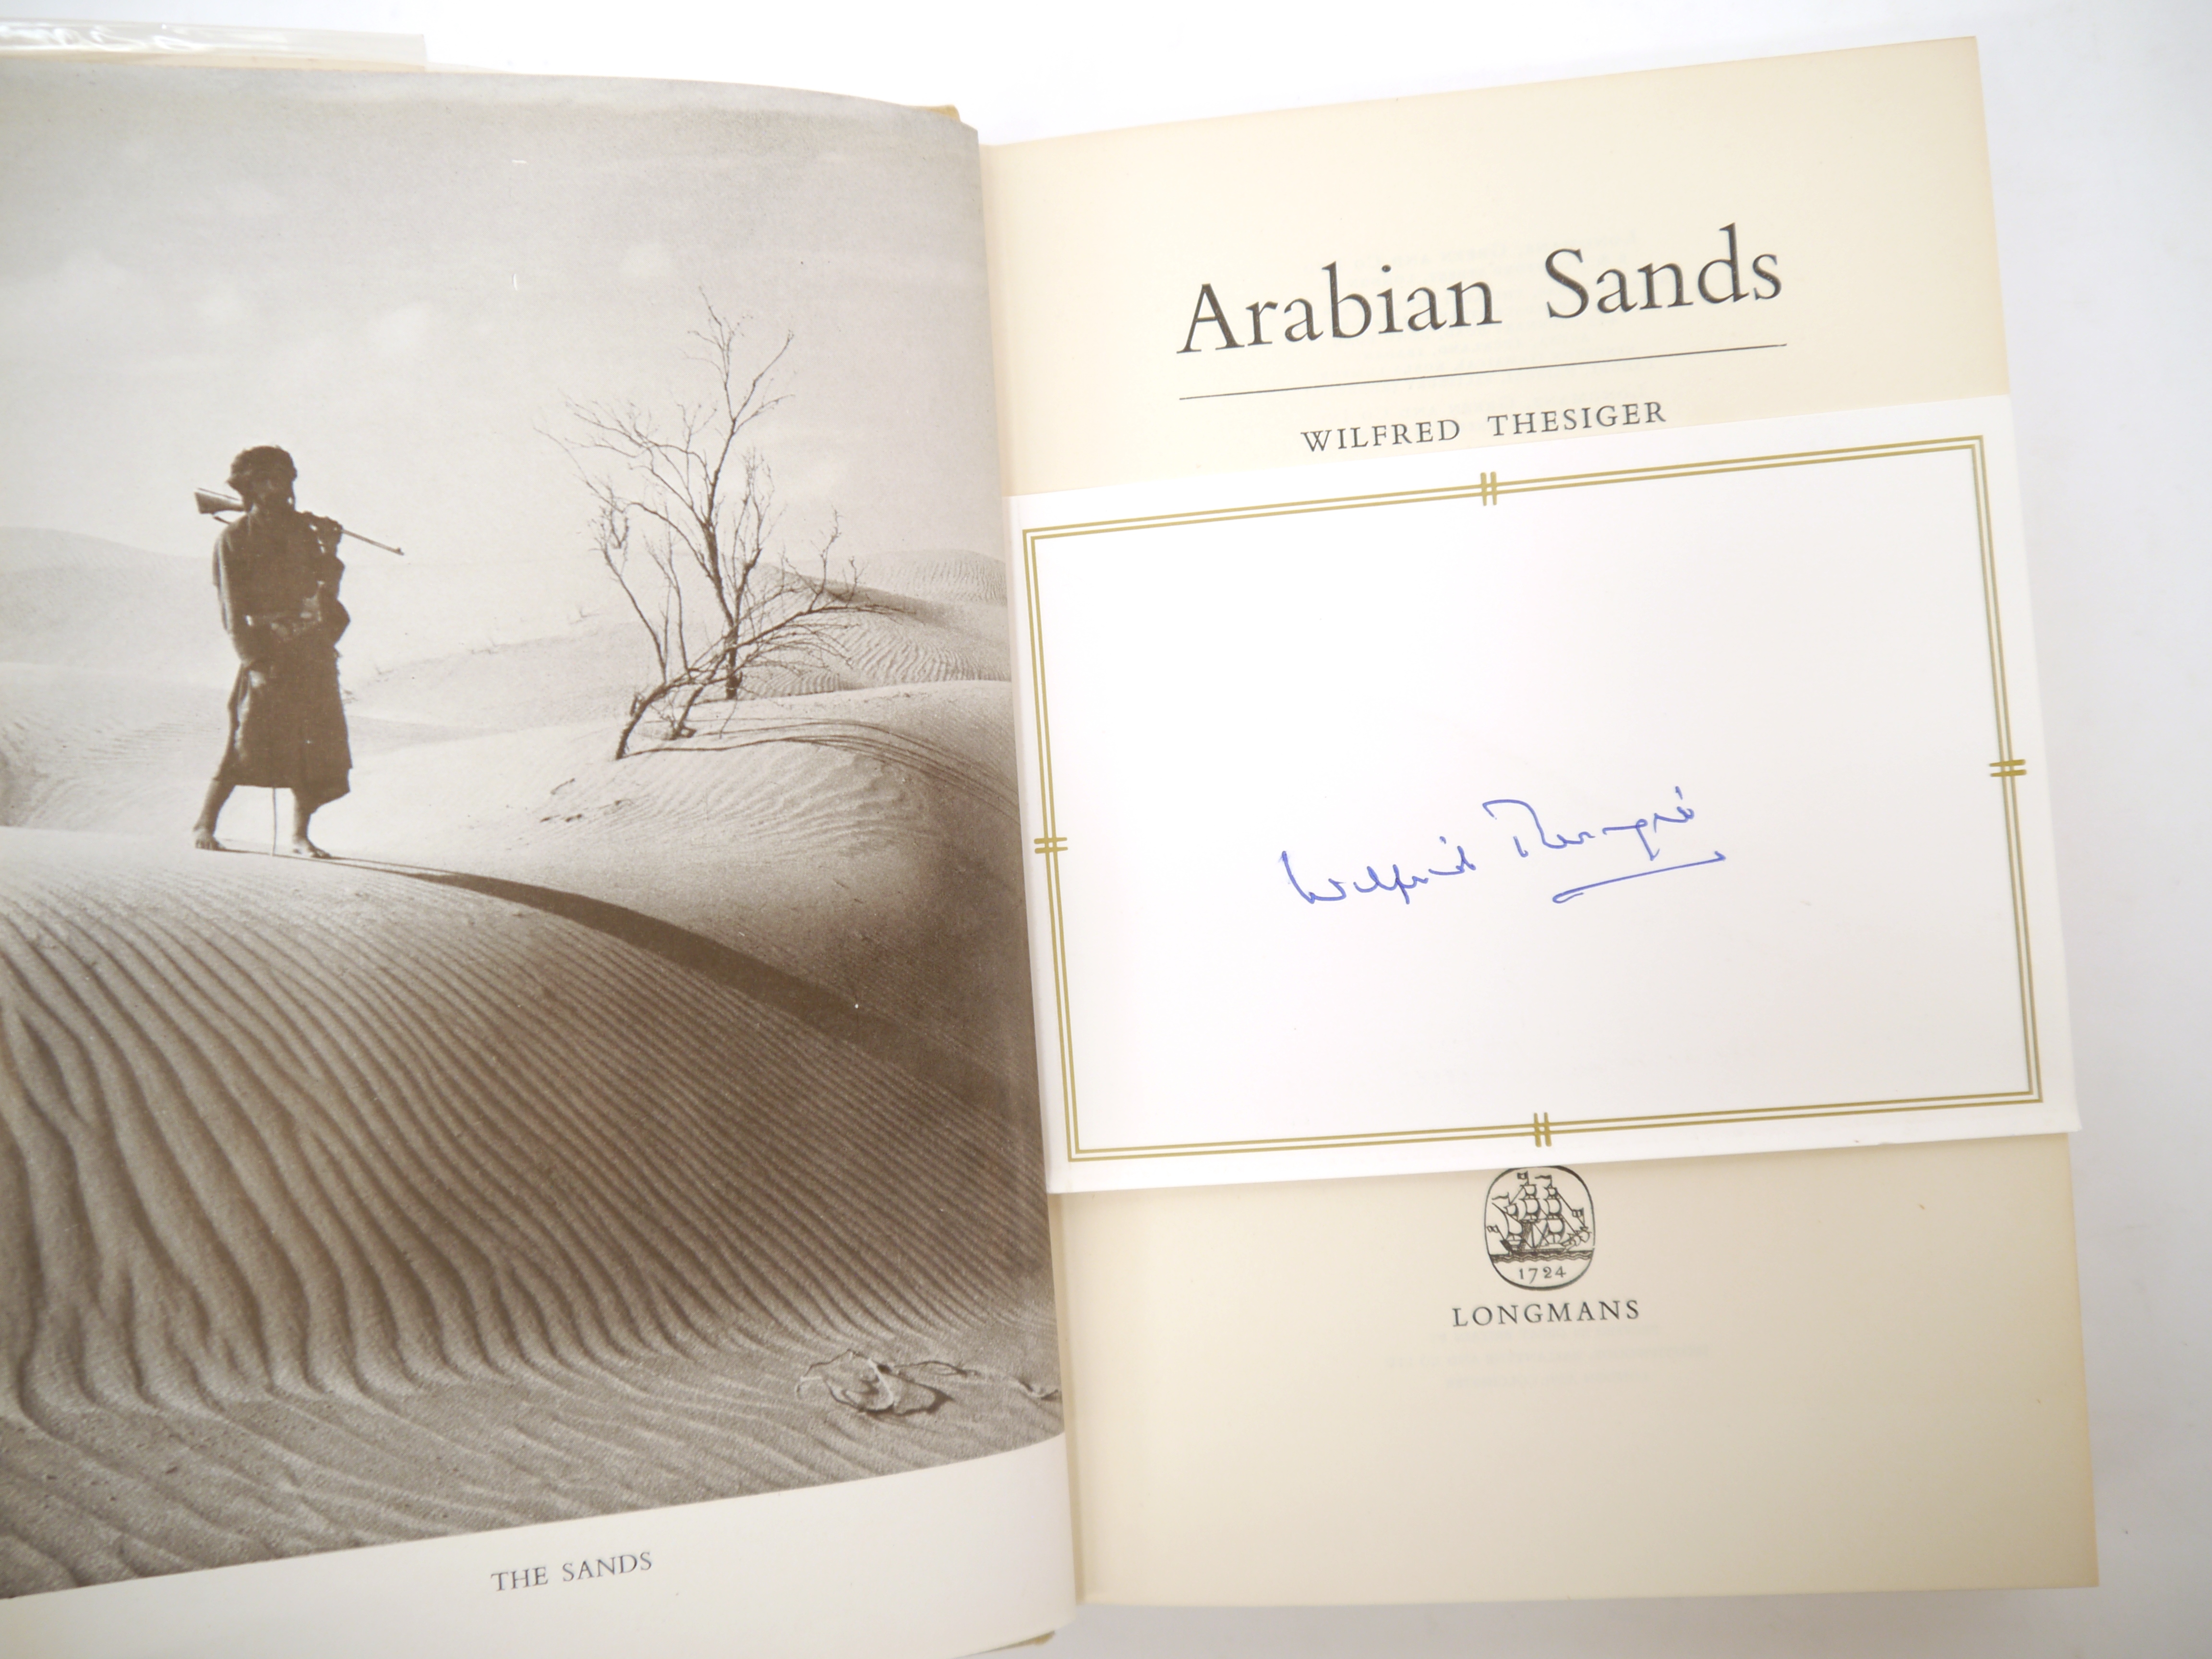 Wilfred Thesiger: 'Arabian Sands', London, Longmans, 1959, 1st edition, card signed by Thesiger in - Image 2 of 7